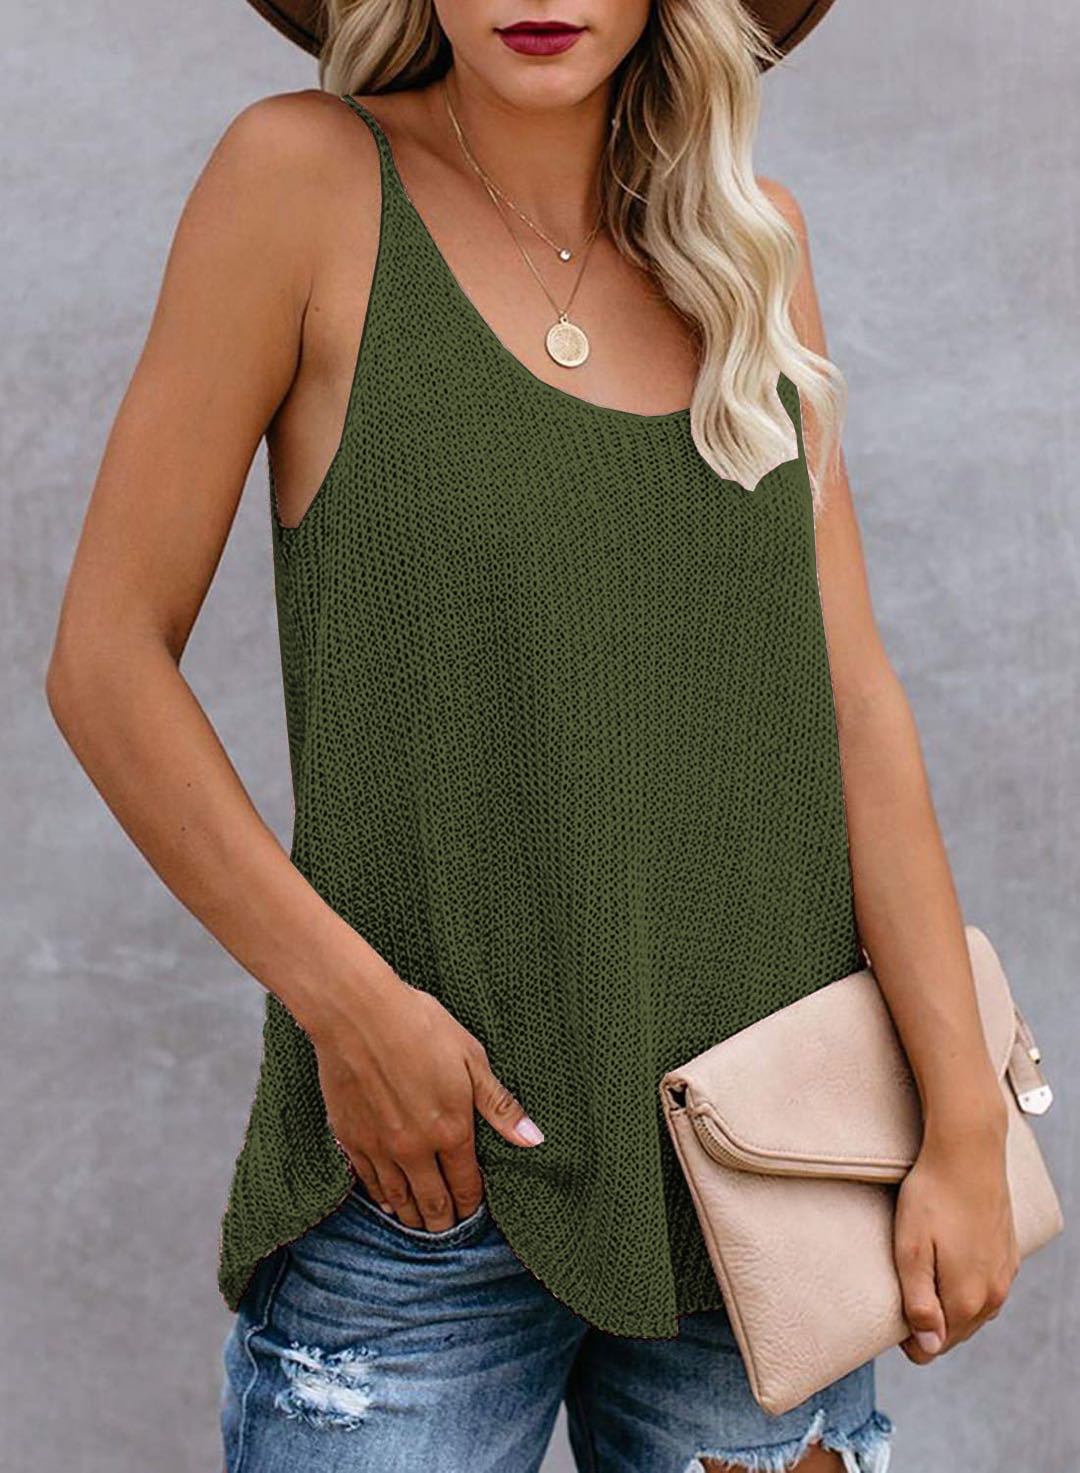 Biucly Women's Scoop Neck Tank Tops Knit Shirts Casual Loose Sleeveless Camis Sweater Blouses